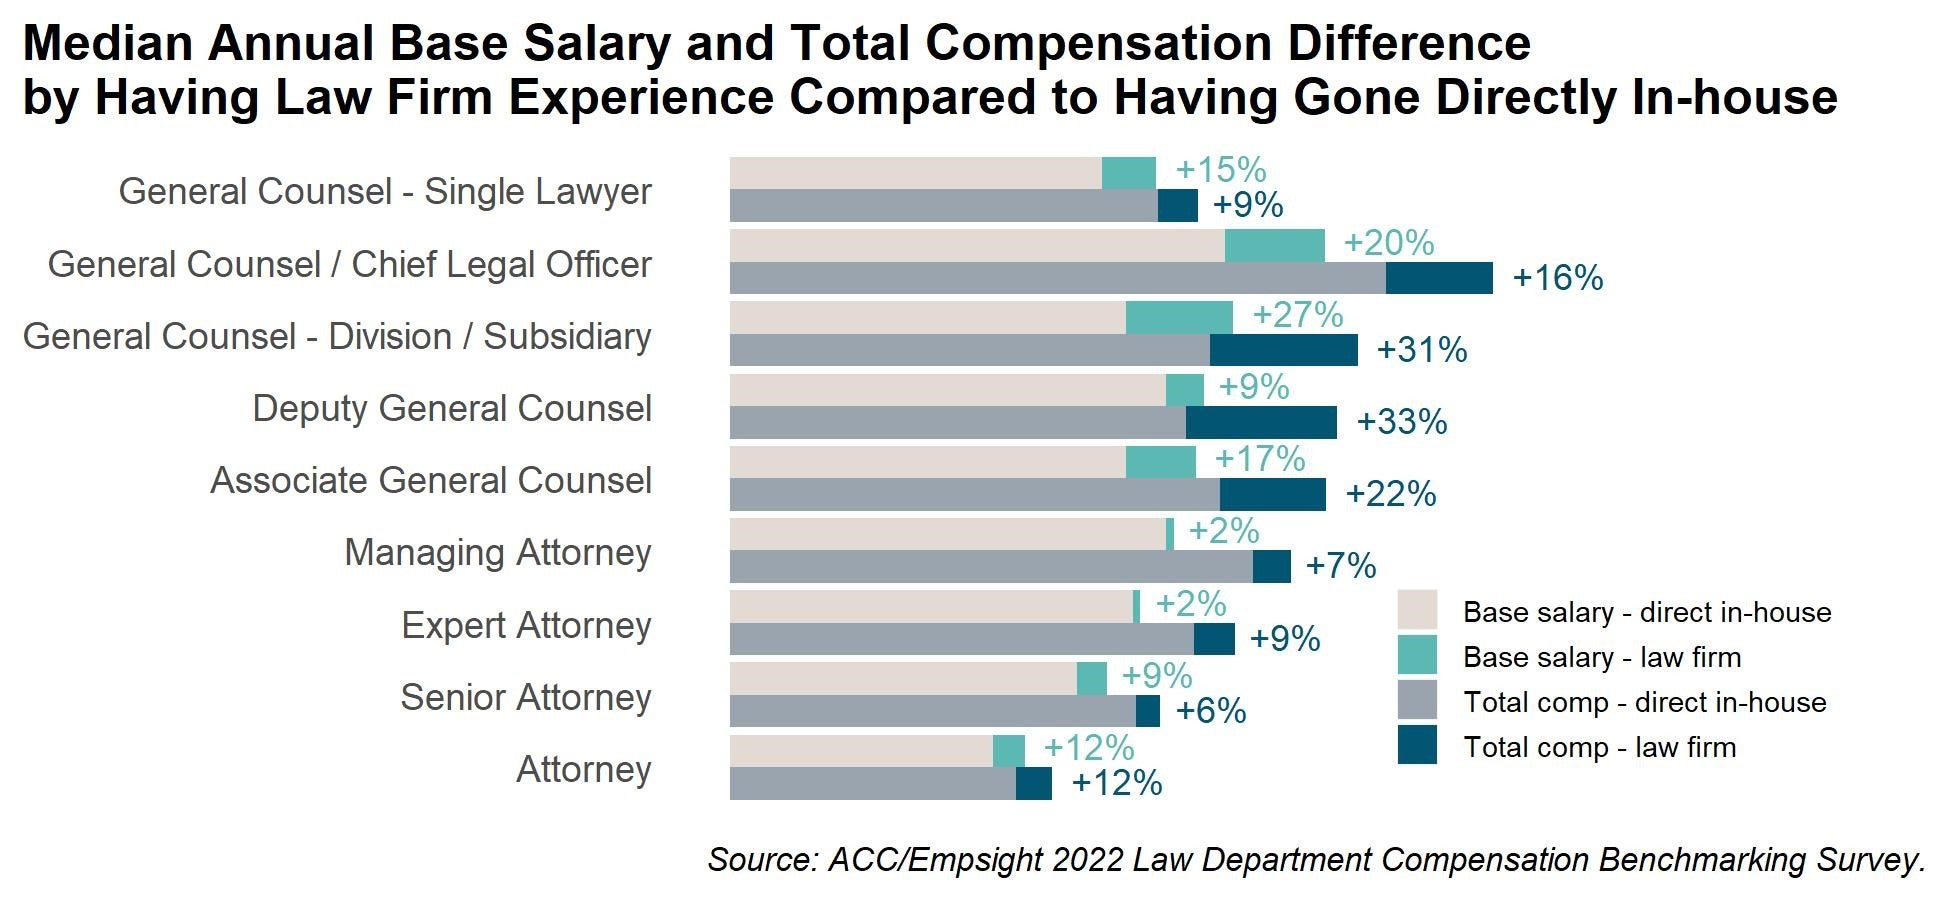 Median Annual Base Salary and Total Compensation Difference by Having Law Firm Experience Copared to Having Gone Directly In-house - chart